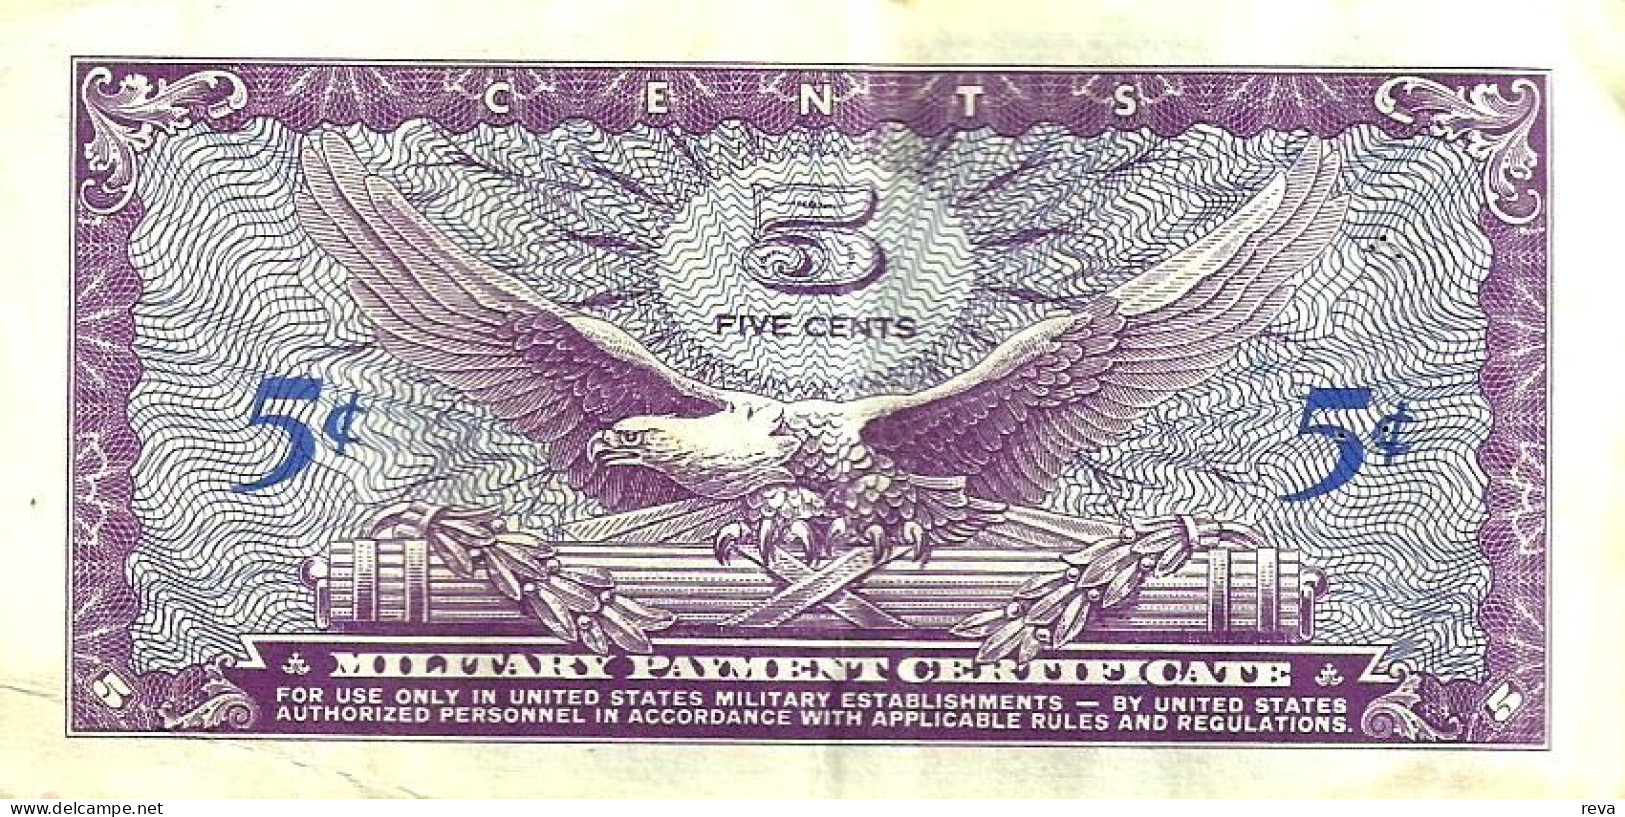 USA UNITED STATES 5 CENTS MILITARY CERTIFICATE PURPLE WOMAN SERIES 641 VF ND(1965-68) PM57a READ DESCRIPTION CAREFULLY!! - 1965-1968 - Reeksen 641